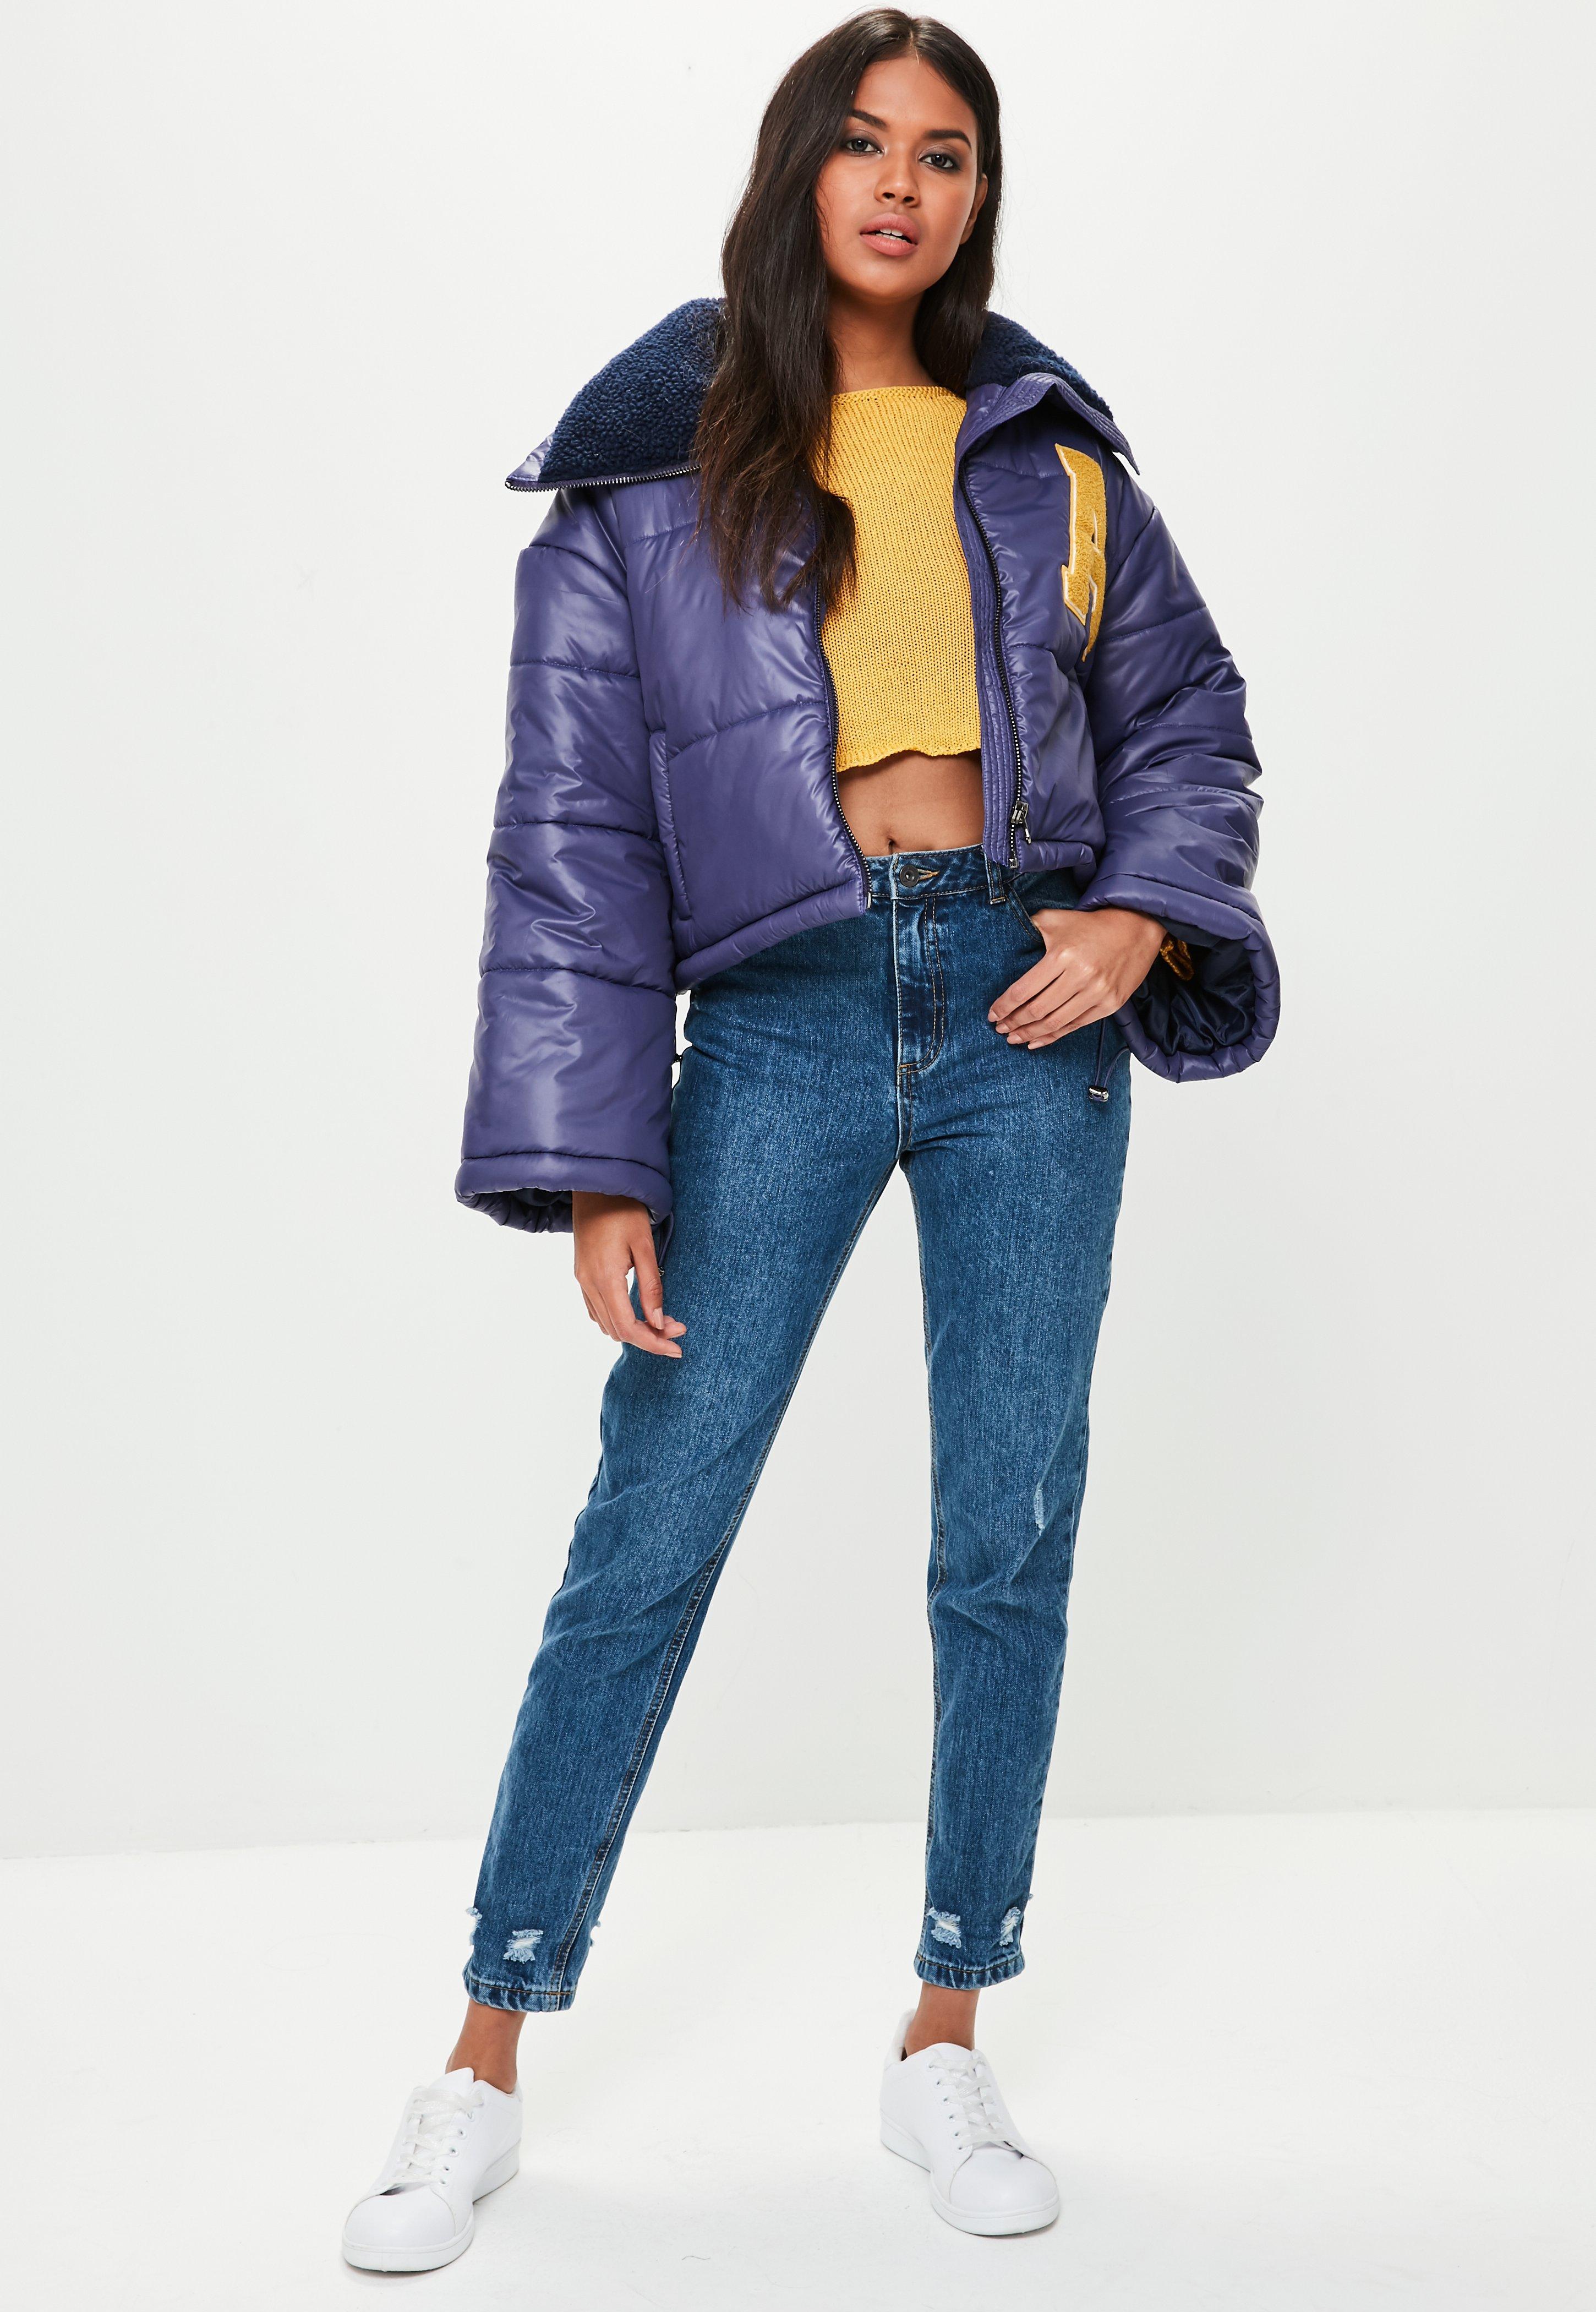 Lyst - Missguided Navy Super Cropped Padded Jacket in Blue